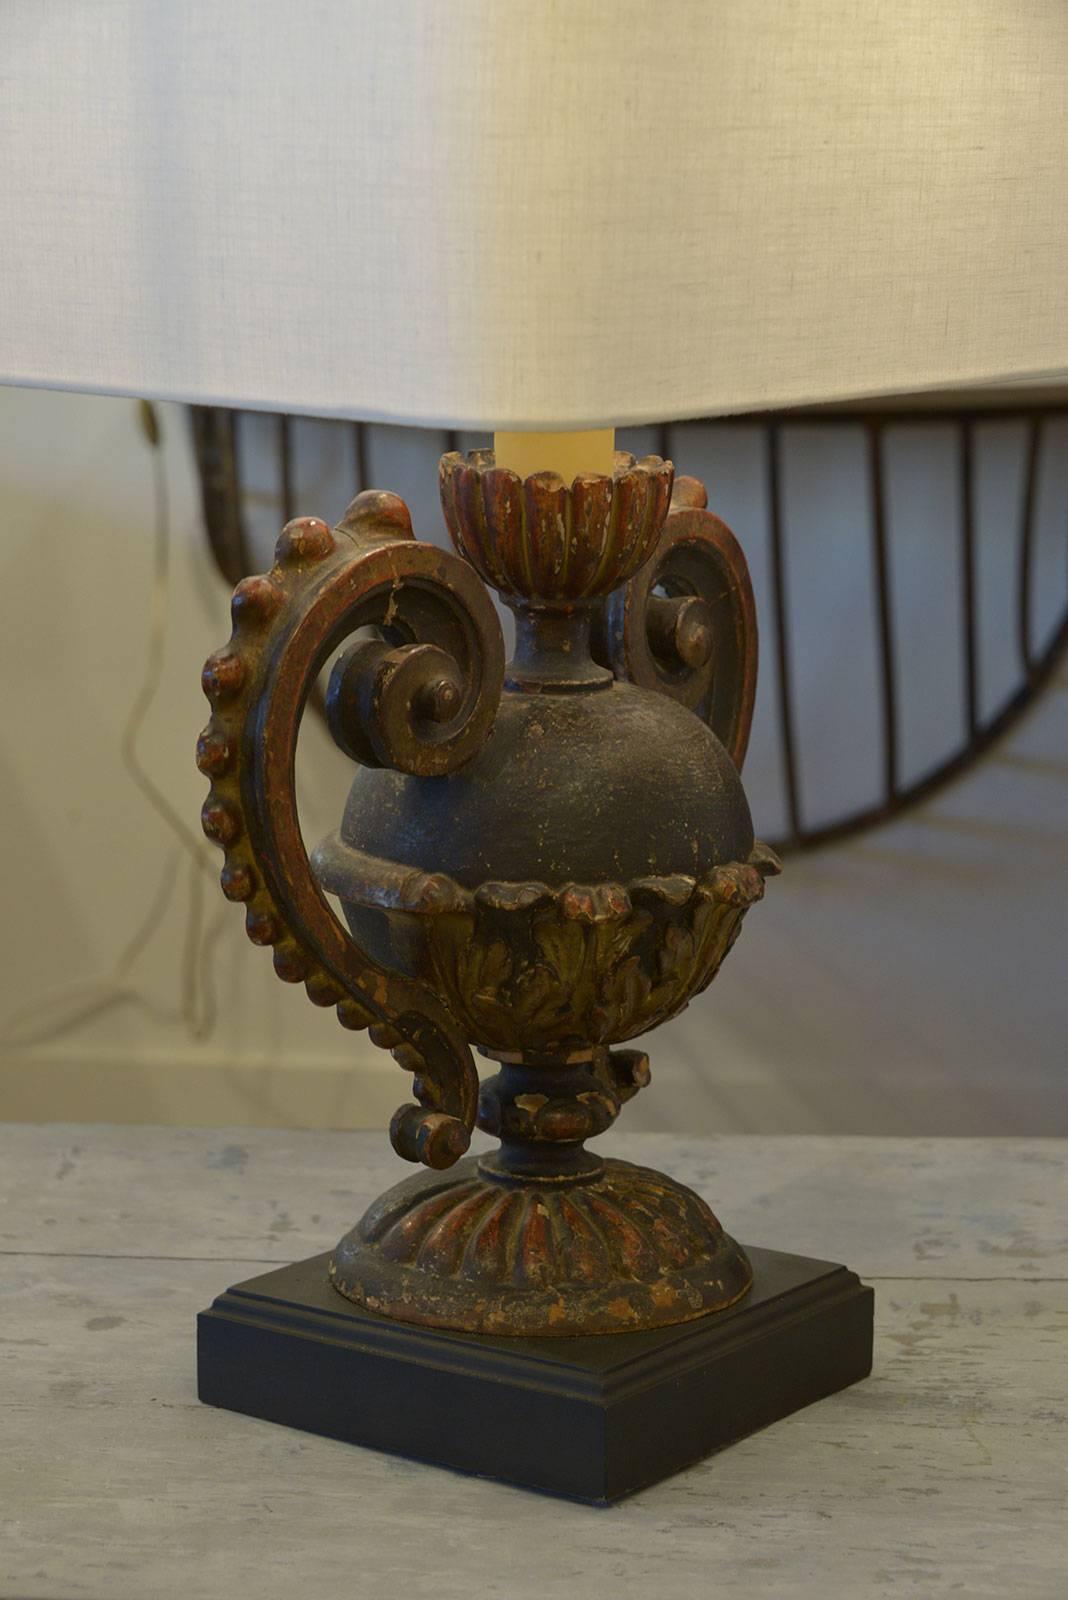 Carved 18th Century Urn-Shape Architectural Fragment Table Lamp